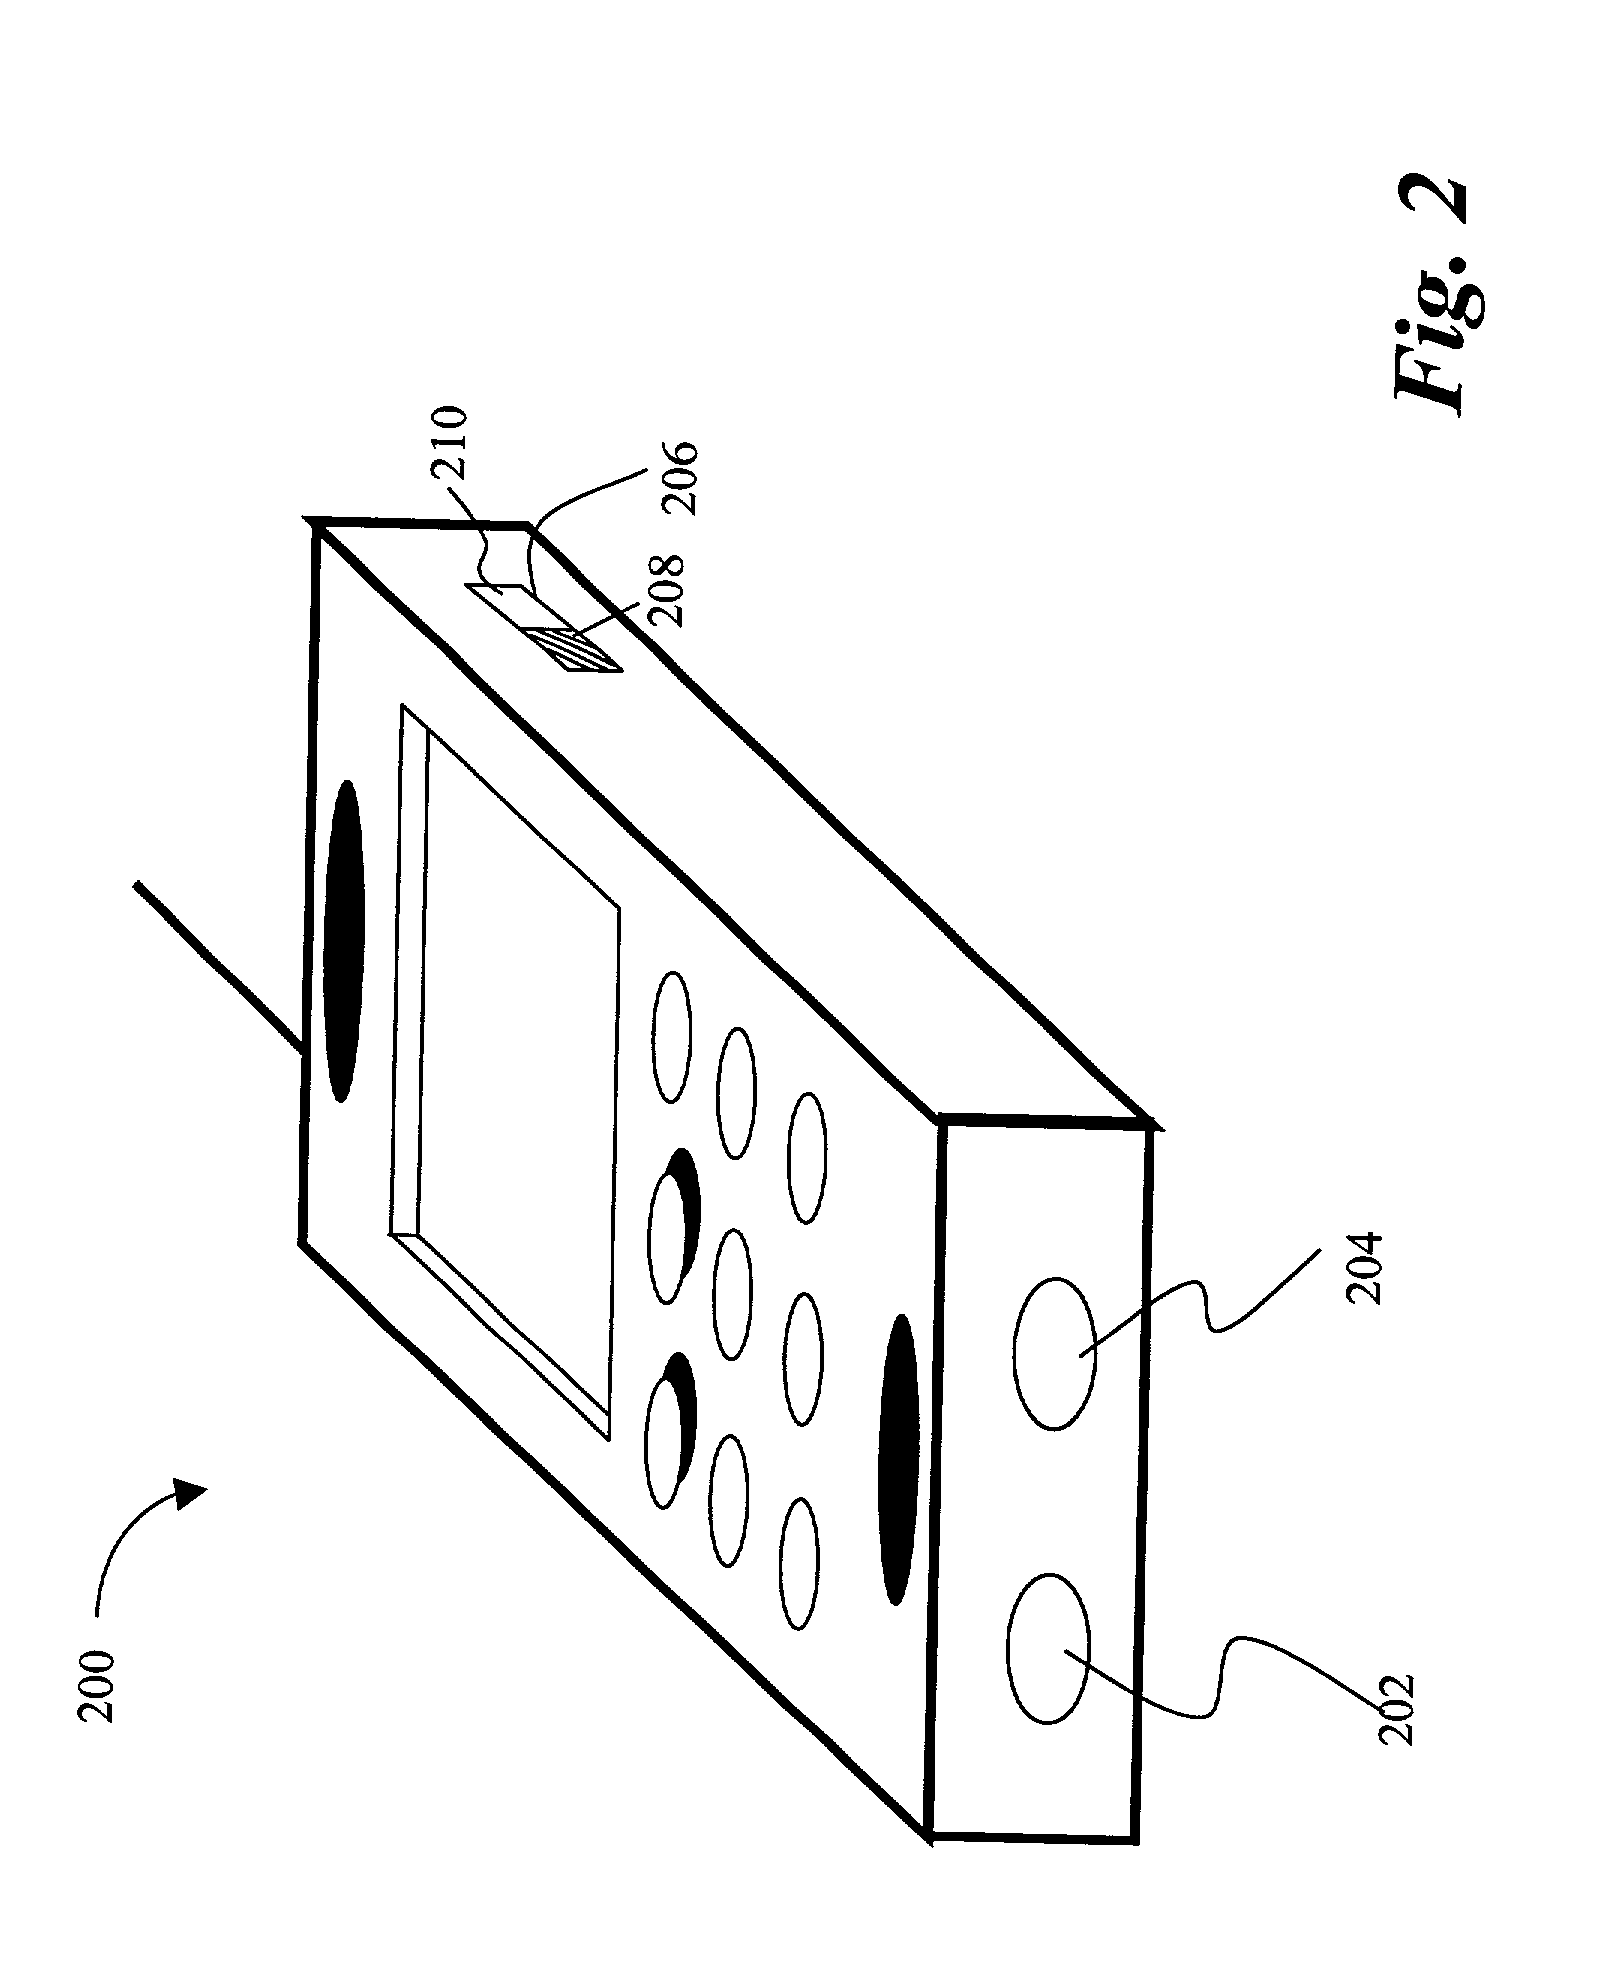 Mobile device equipped with digital image sensor